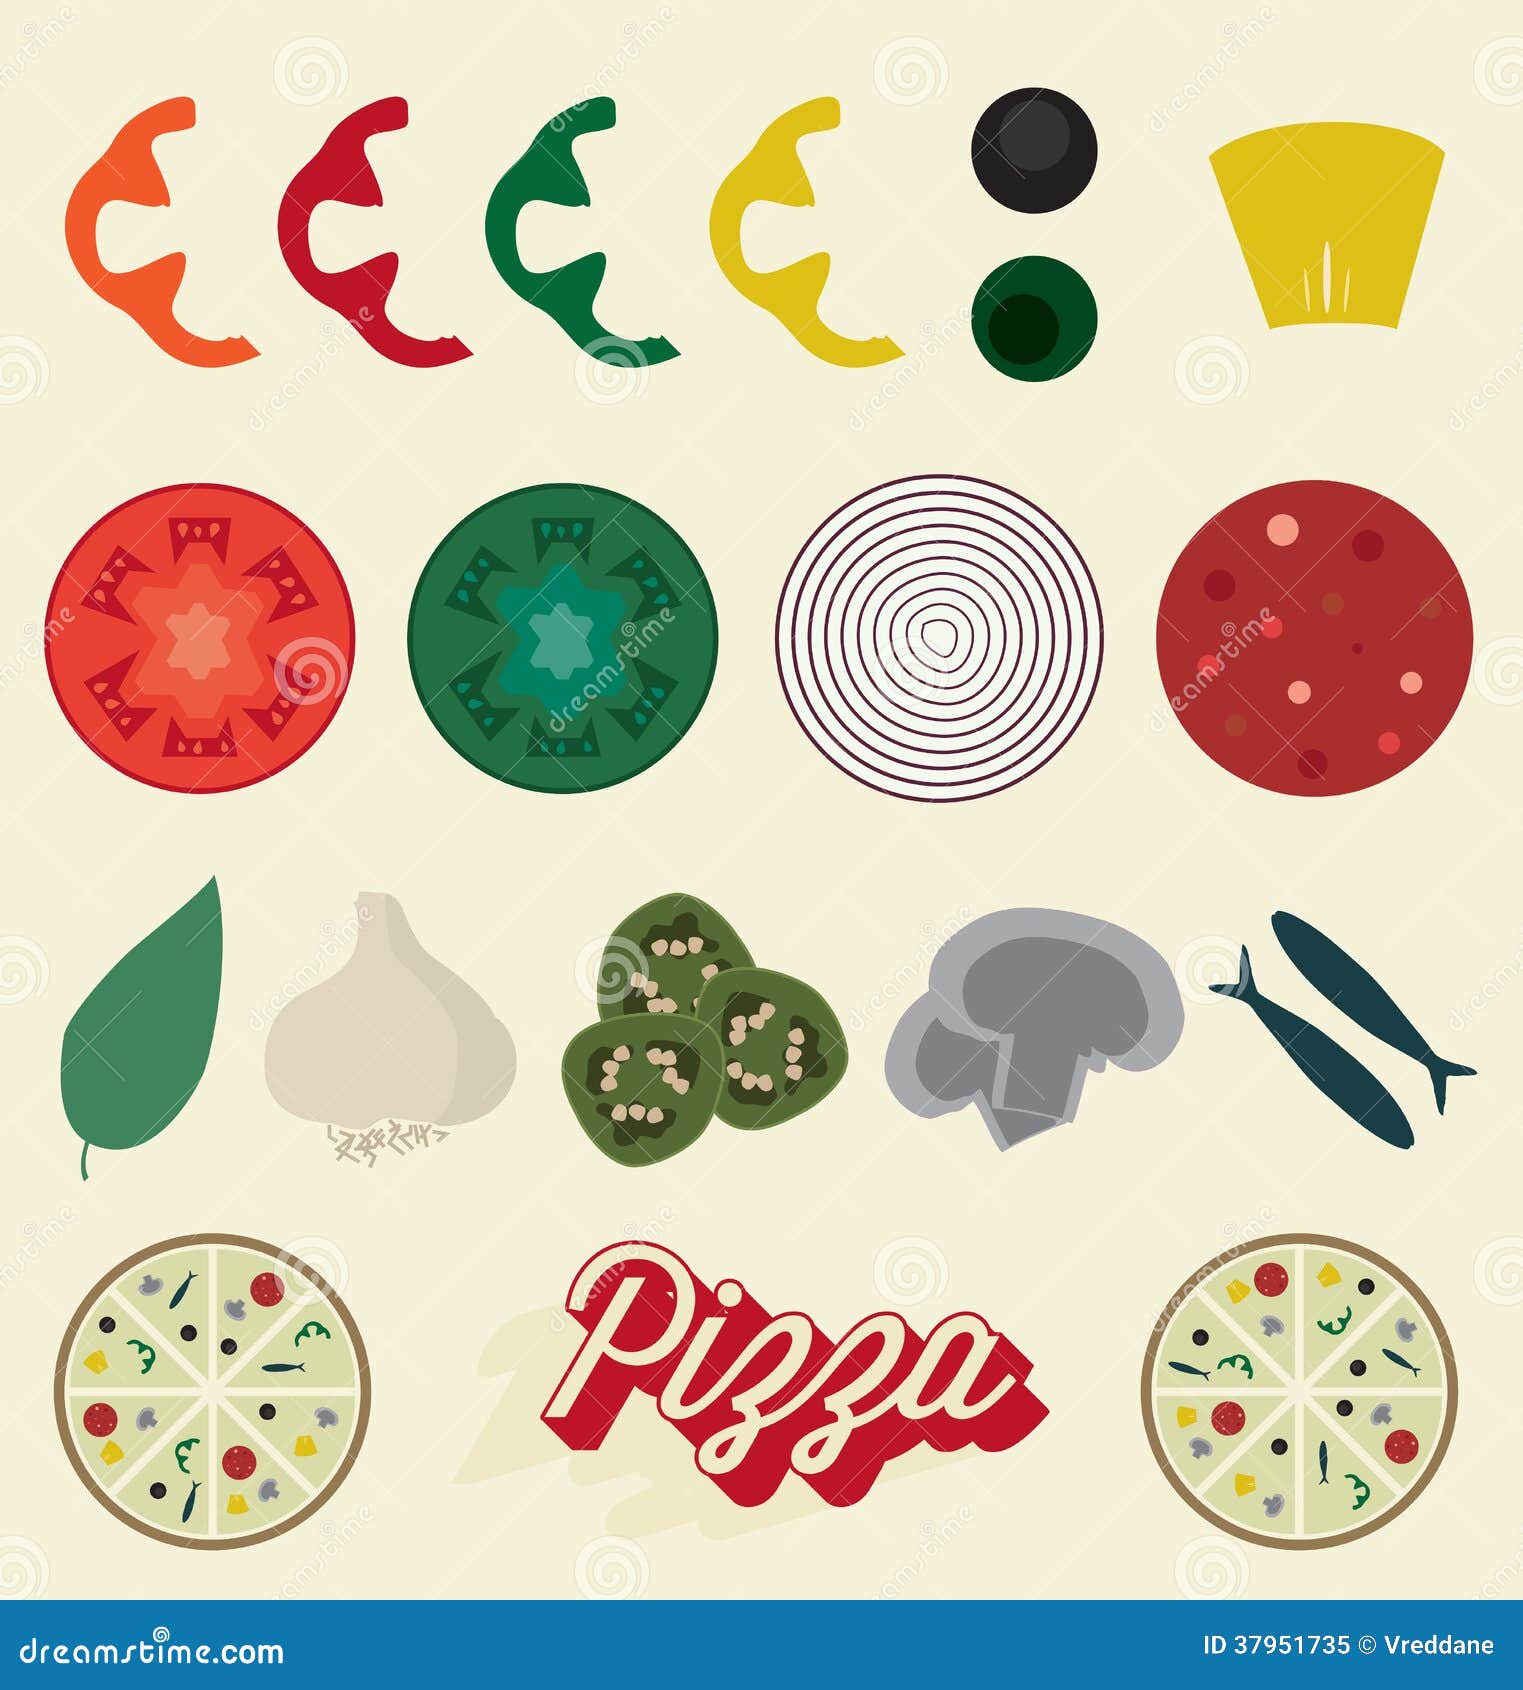 free clipart pizza toppings - photo #8